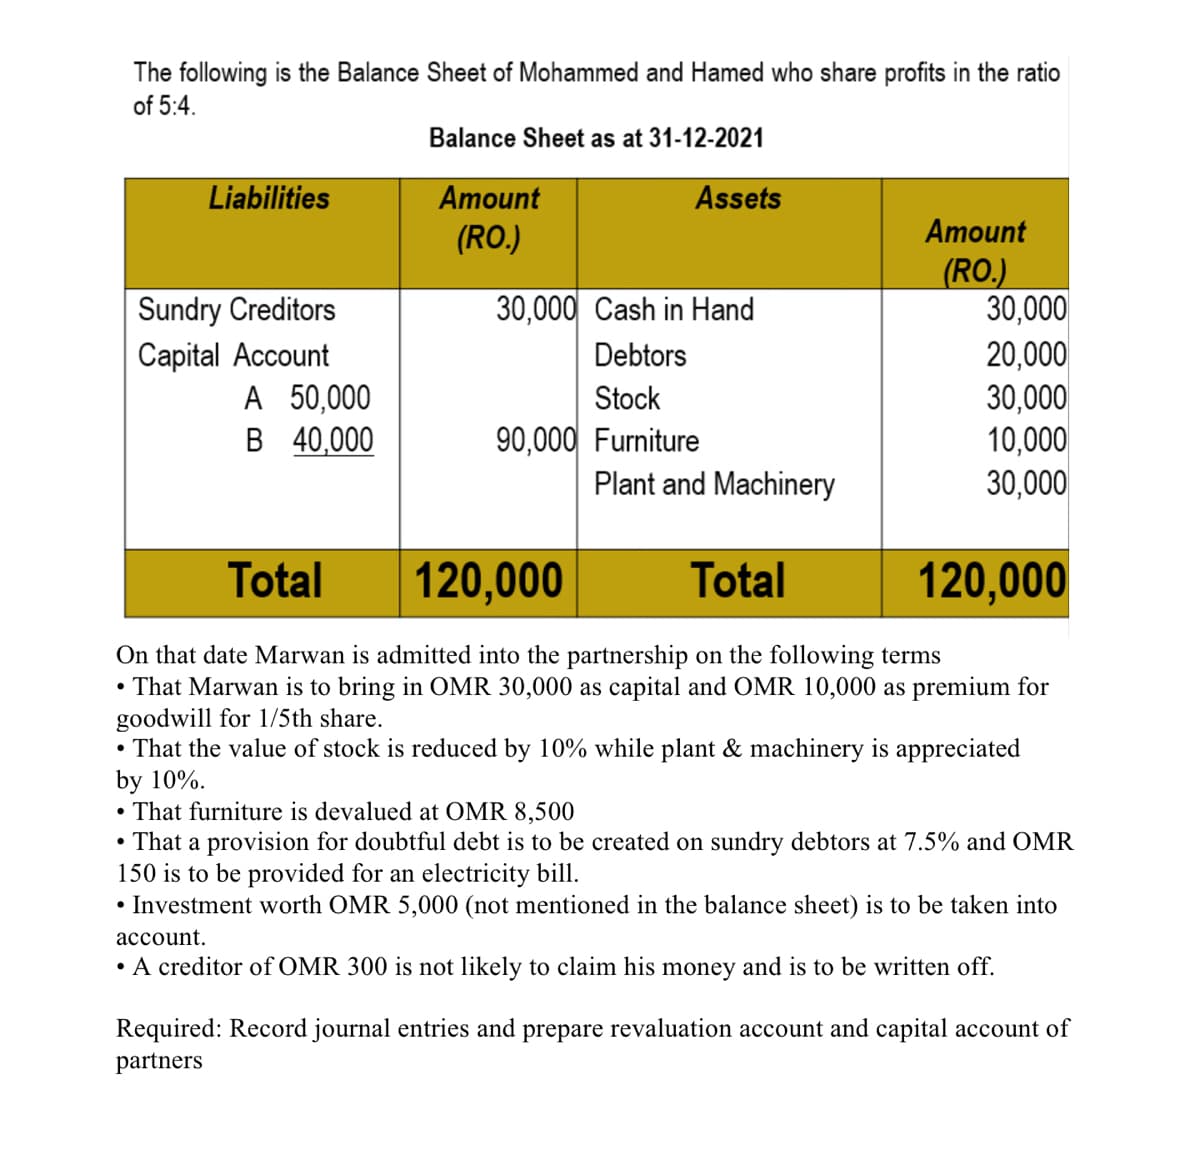 The following is the Balance Sheet of Mohammed and Hamed who share profits in the ratio
of 5:4.
Balance Sheet as at 31-12-2021
Liabilities
Amount
Assets
(RO.)
Amount
(RO.)
Sundry Creditors
30,000 Cash in Hand
Capital Account
Debtors
Stock
90,000 Furniture
30,000
20,000
30,000
10,000
Plant and Machinery
30,000
Total
120,000
Total
120,000
On that date Marwan is admitted into the partnership on the following terms
• That Marwan is to bring in OMR 30,000 as capital and OMR 10,000 as premium for
goodwill for 1/5th share.
• That the value of stock is reduced by 10% while plant & machinery is appreciated
by 10%.
• That furniture is devalued at OMR 8,500
• That a provision for doubtful debt is to be created on sundry debtors at 7.5% and OMR
150 is to be provided for electricity bill.
• Investment worth OMR 5,000 (not mentioned in the balance sheet) is to be taken into
account.
• A creditor of OMR 300 is not likely to claim his money and is to be written off.
Required: Record journal entries and prepare revaluation account and capital account of
partners
A 50,000
B 40,000